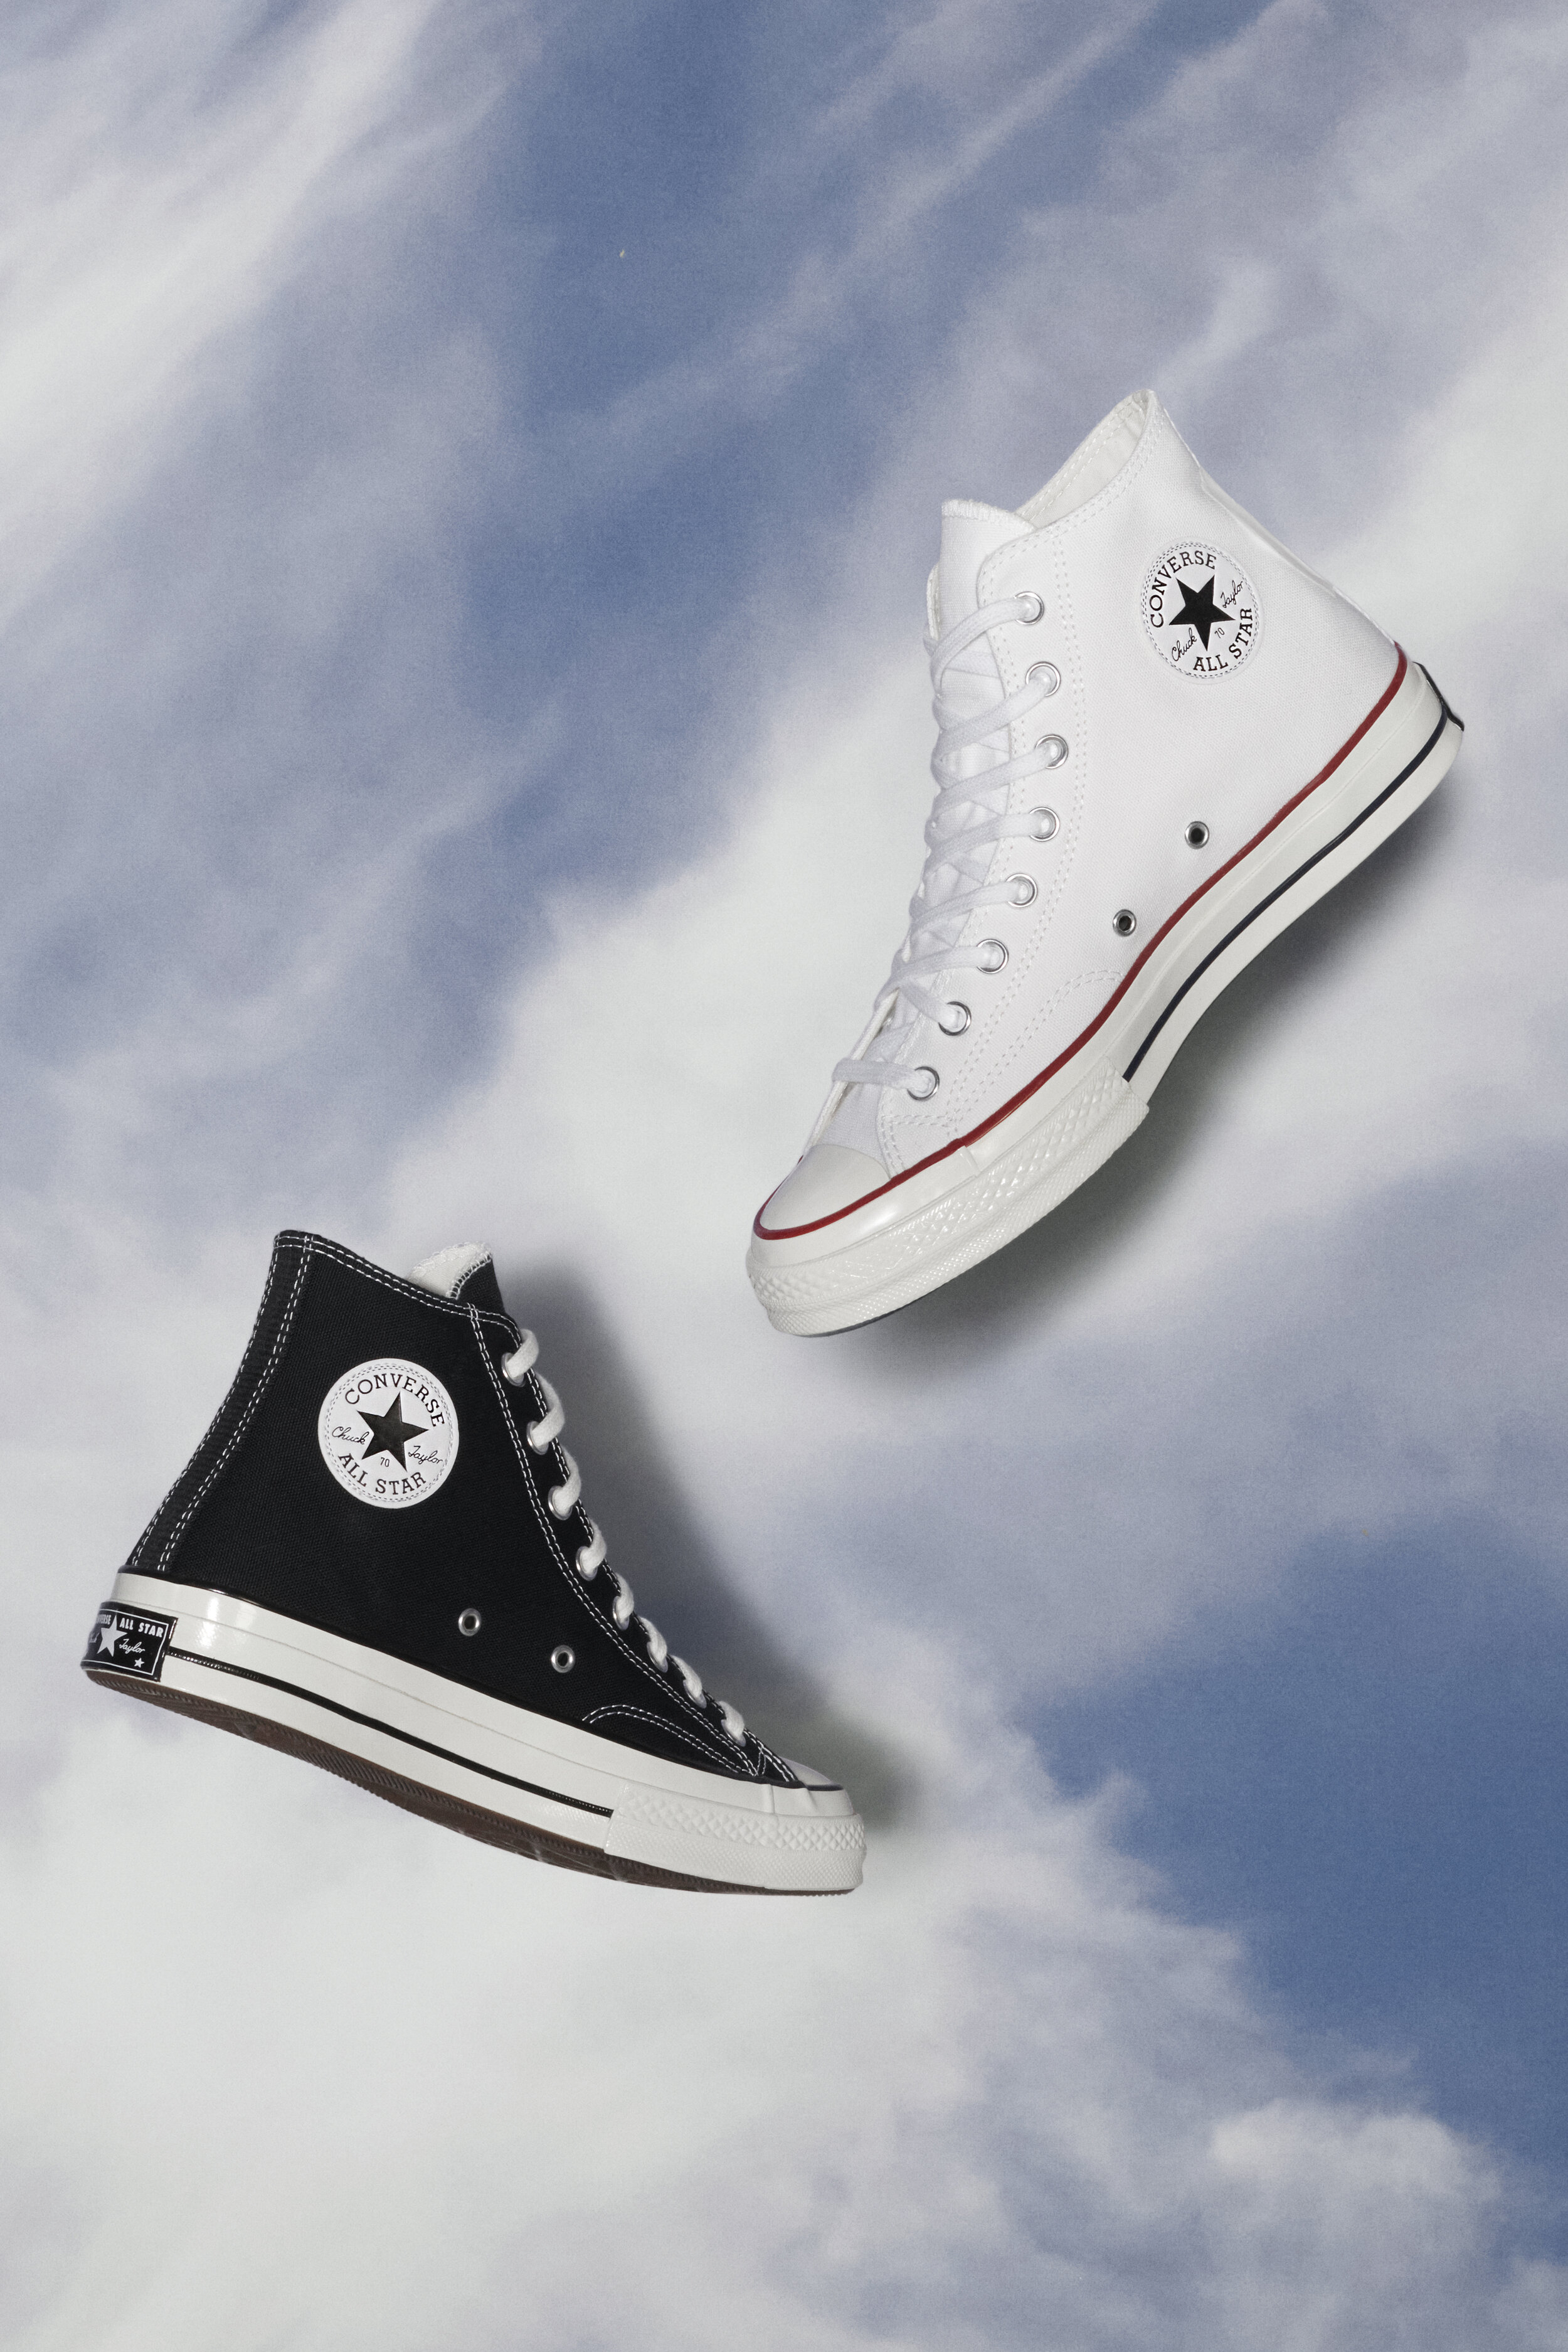 converse careers nyc,Quality assurance 